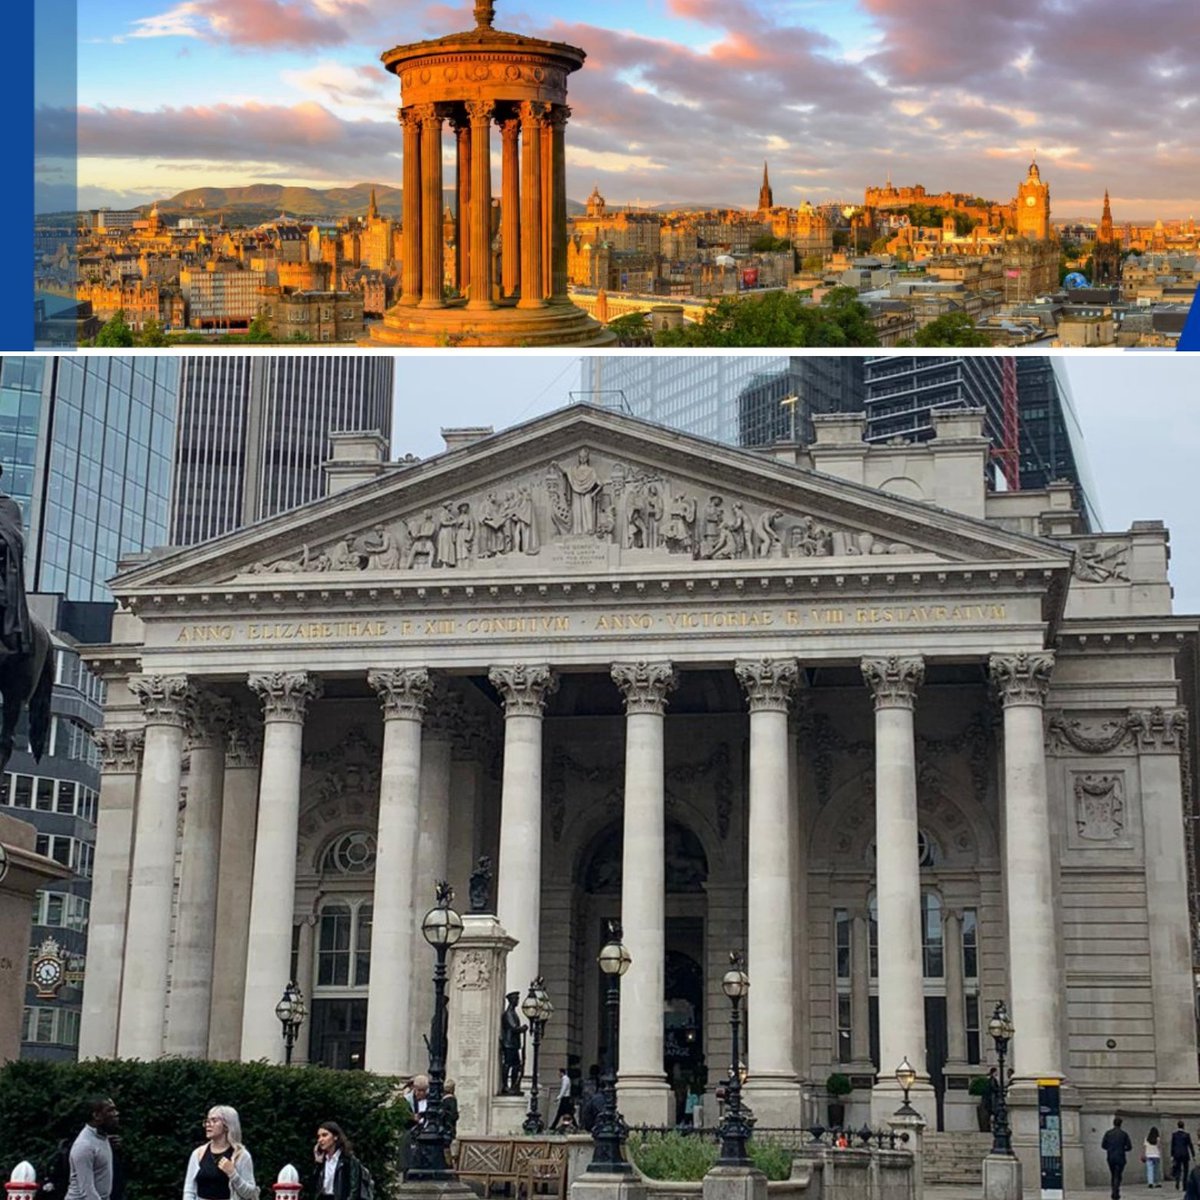 A tale of 2 capital cities! Delighted to attend @R3_Membership's excellent Scotland #Insolvency Forum in #Edinburgh & @GRRalerts's superb Women in #Restructuring event in #London this week. Marvellous speakers, interesting subjects & great catching up with so many people.